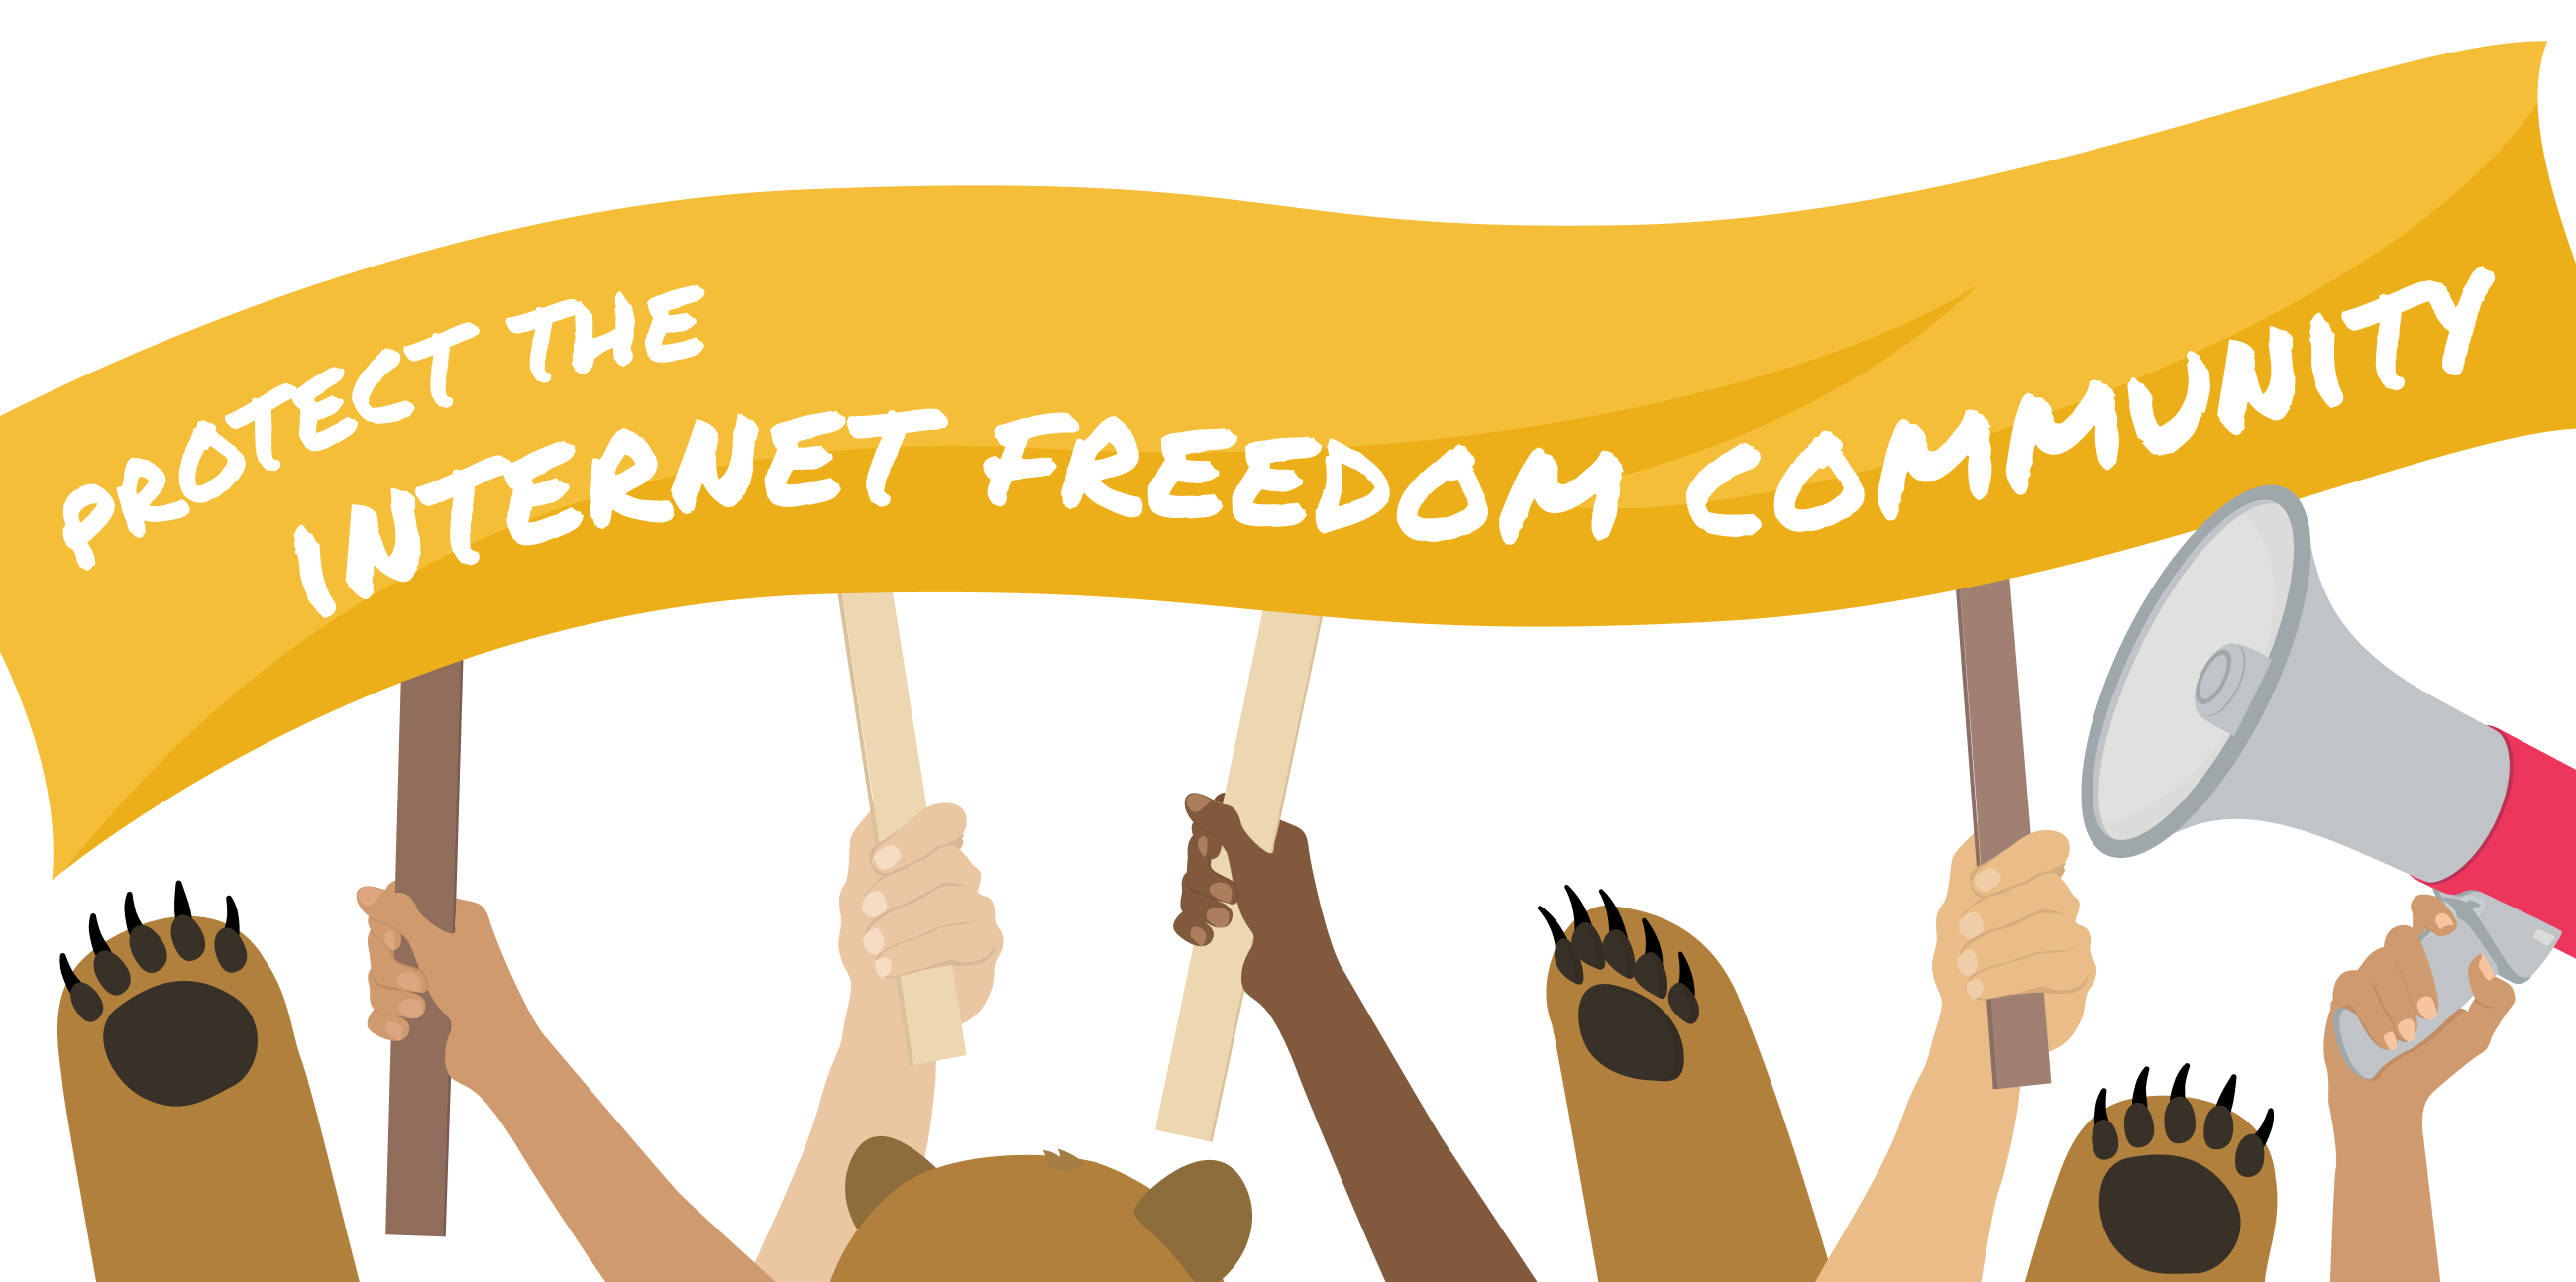 Why Internet Freedom Should be at the Top of the Global Democracy Agenda